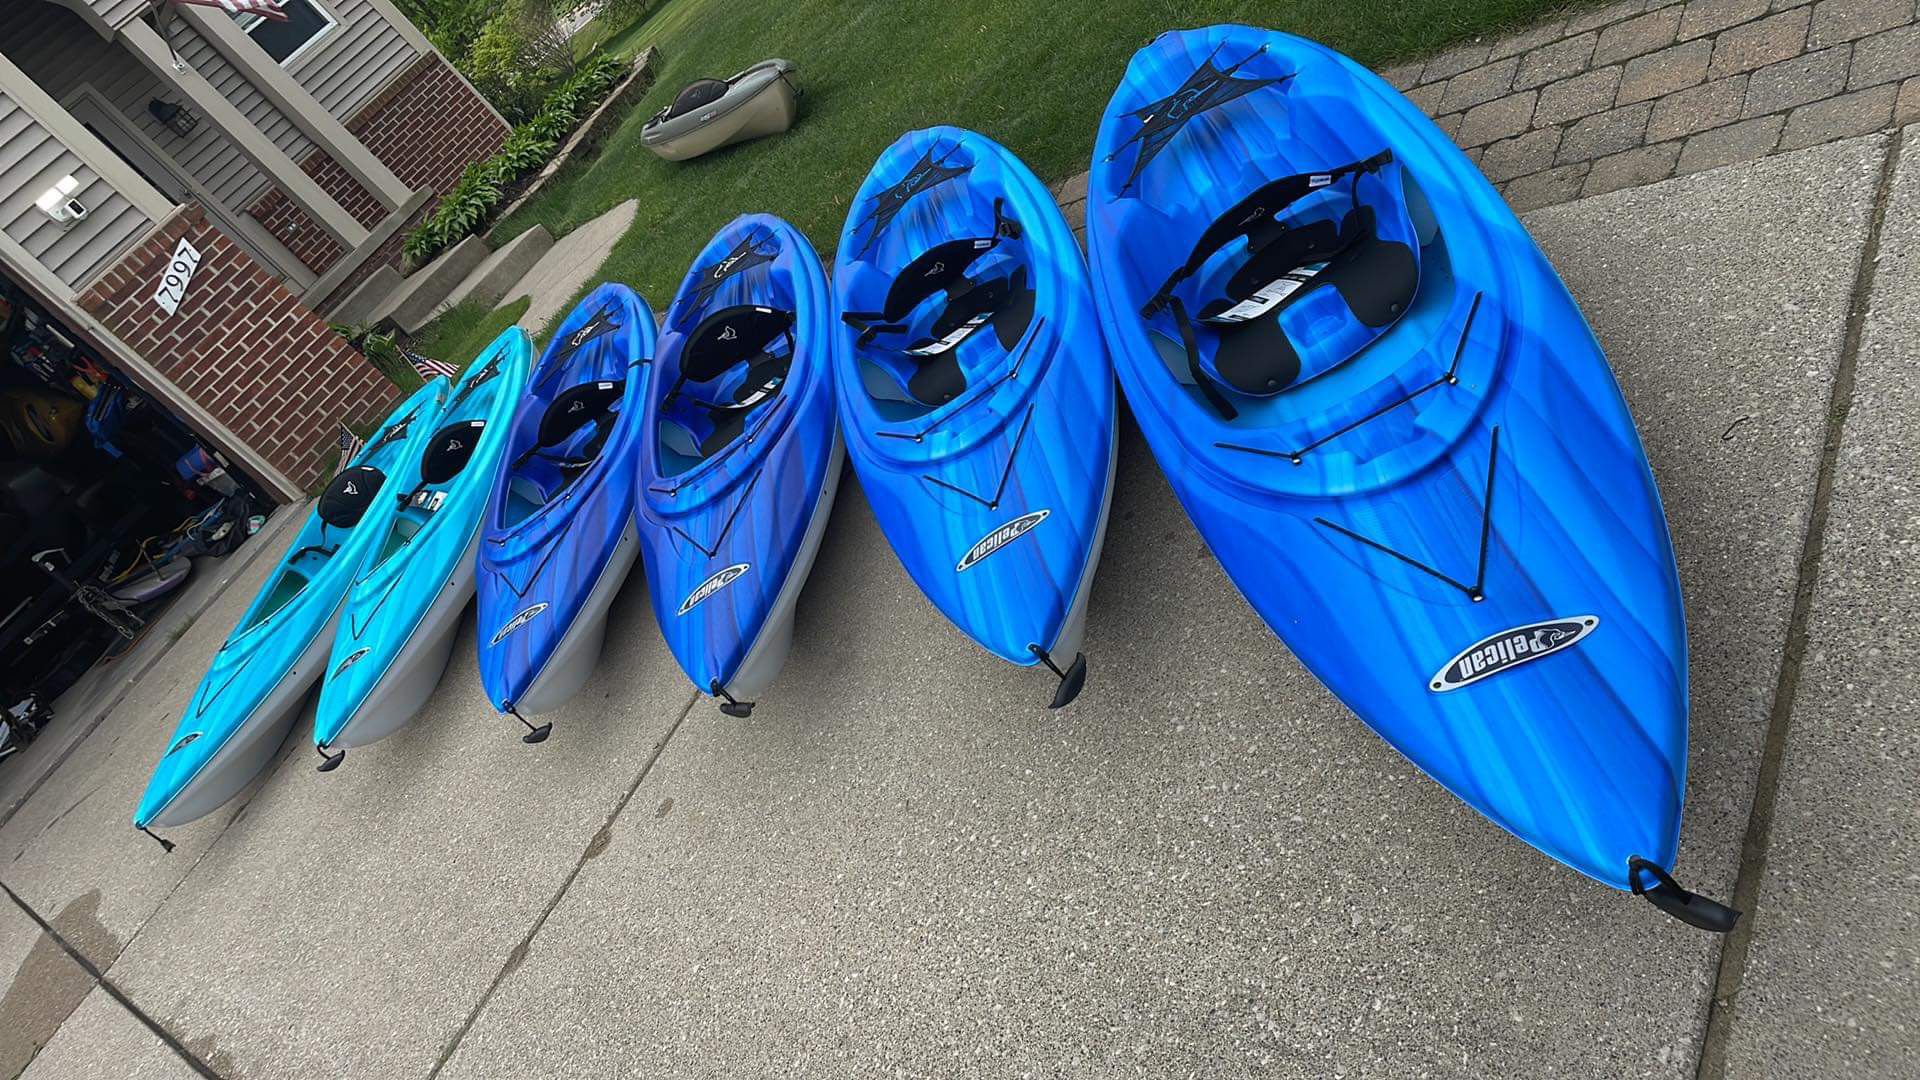 Brand New 10 Ft Pelican Kayaks With tags